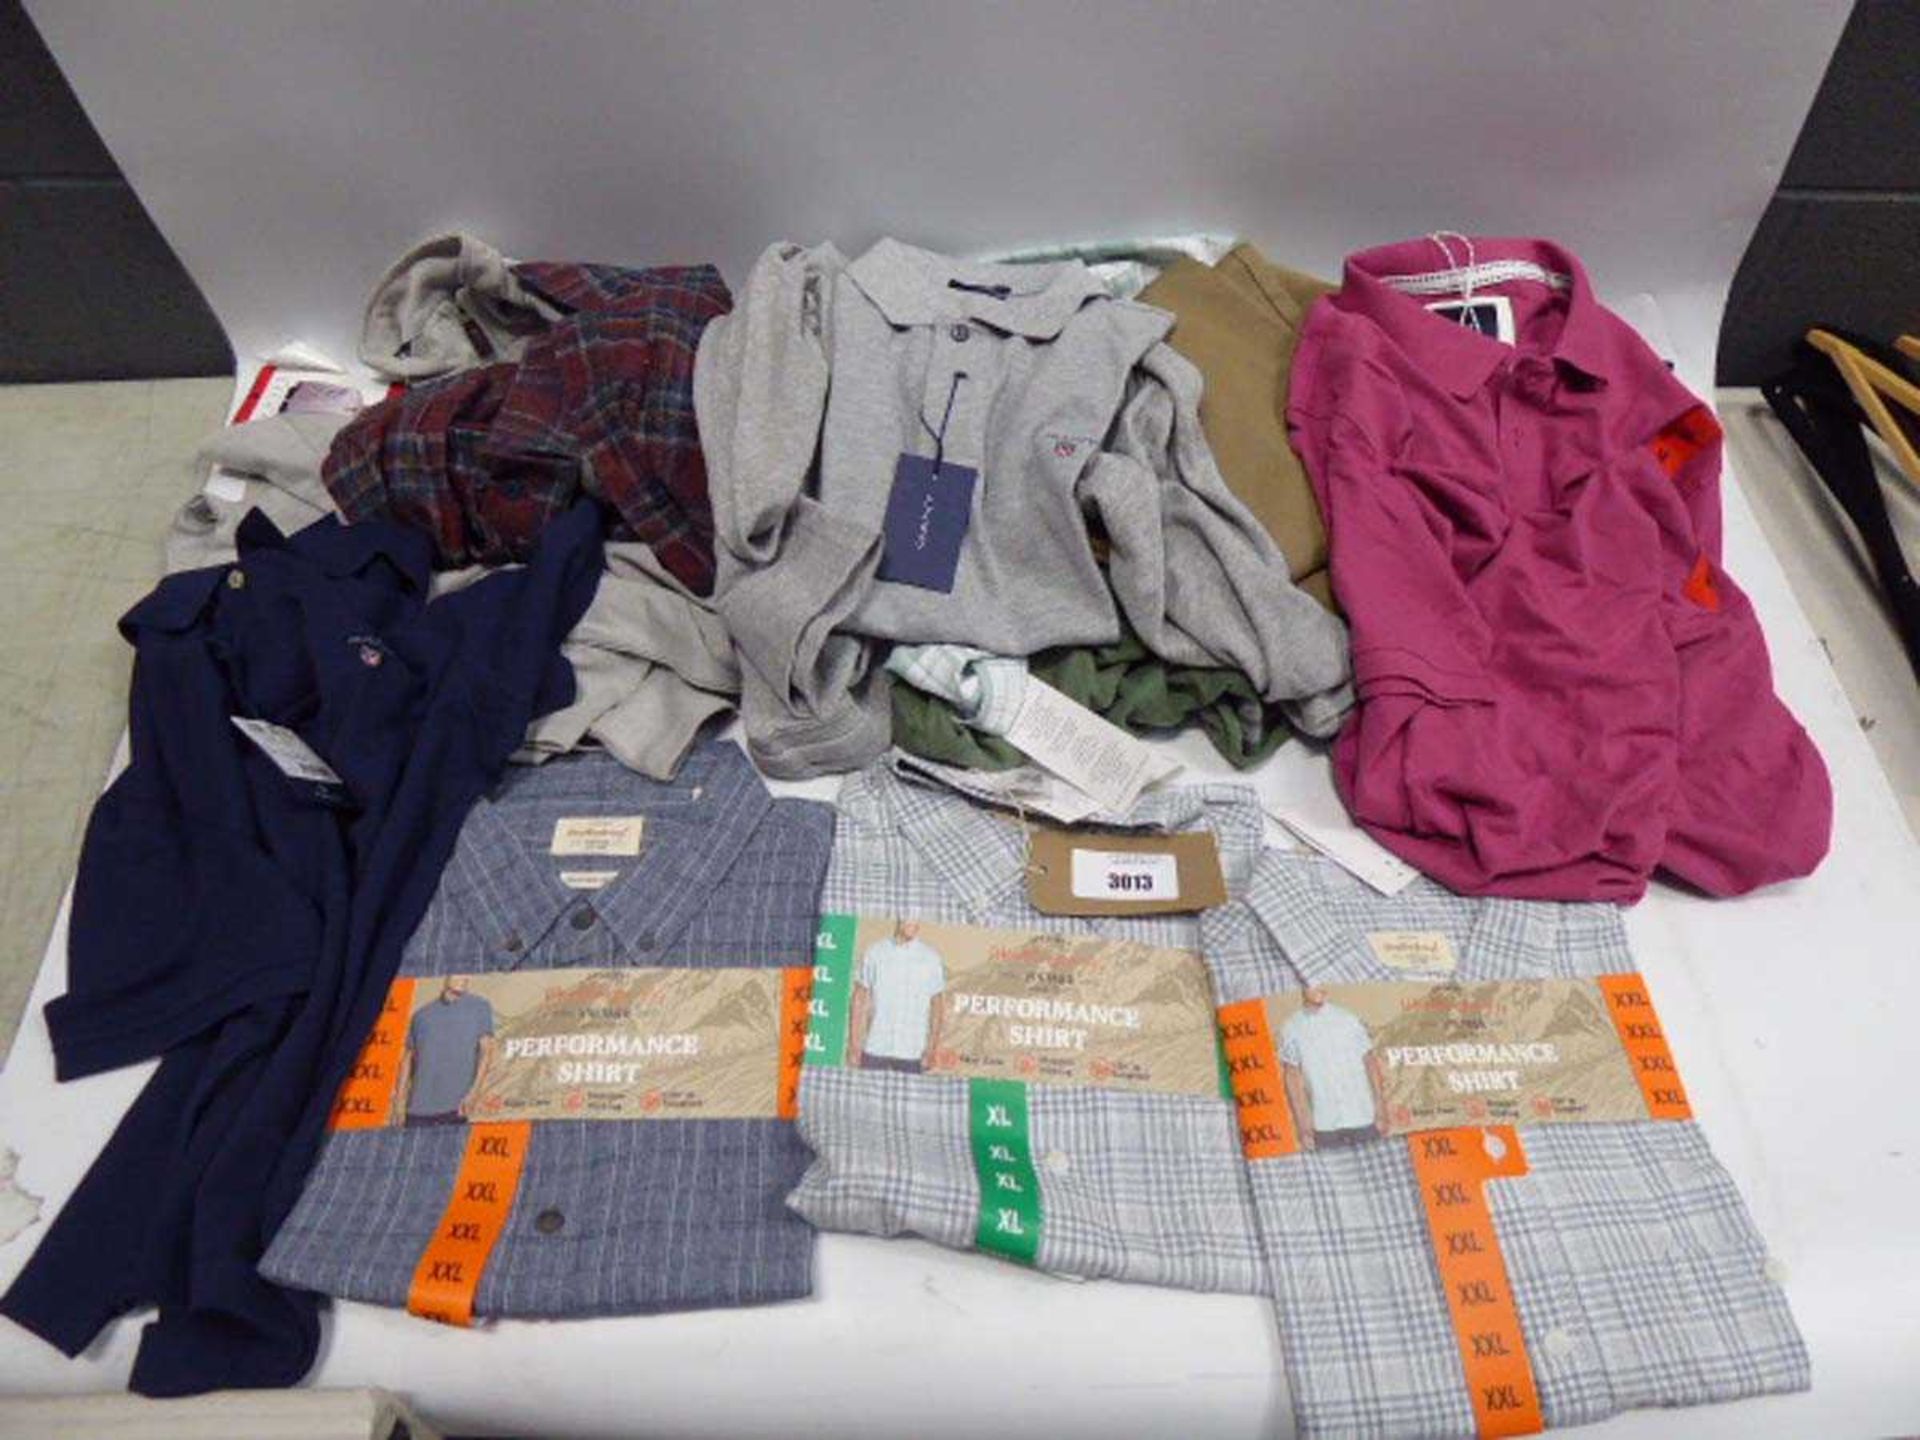 +VAT A bag containing Men's Clothing in various styles & sizes including Gant, Crew Clothing